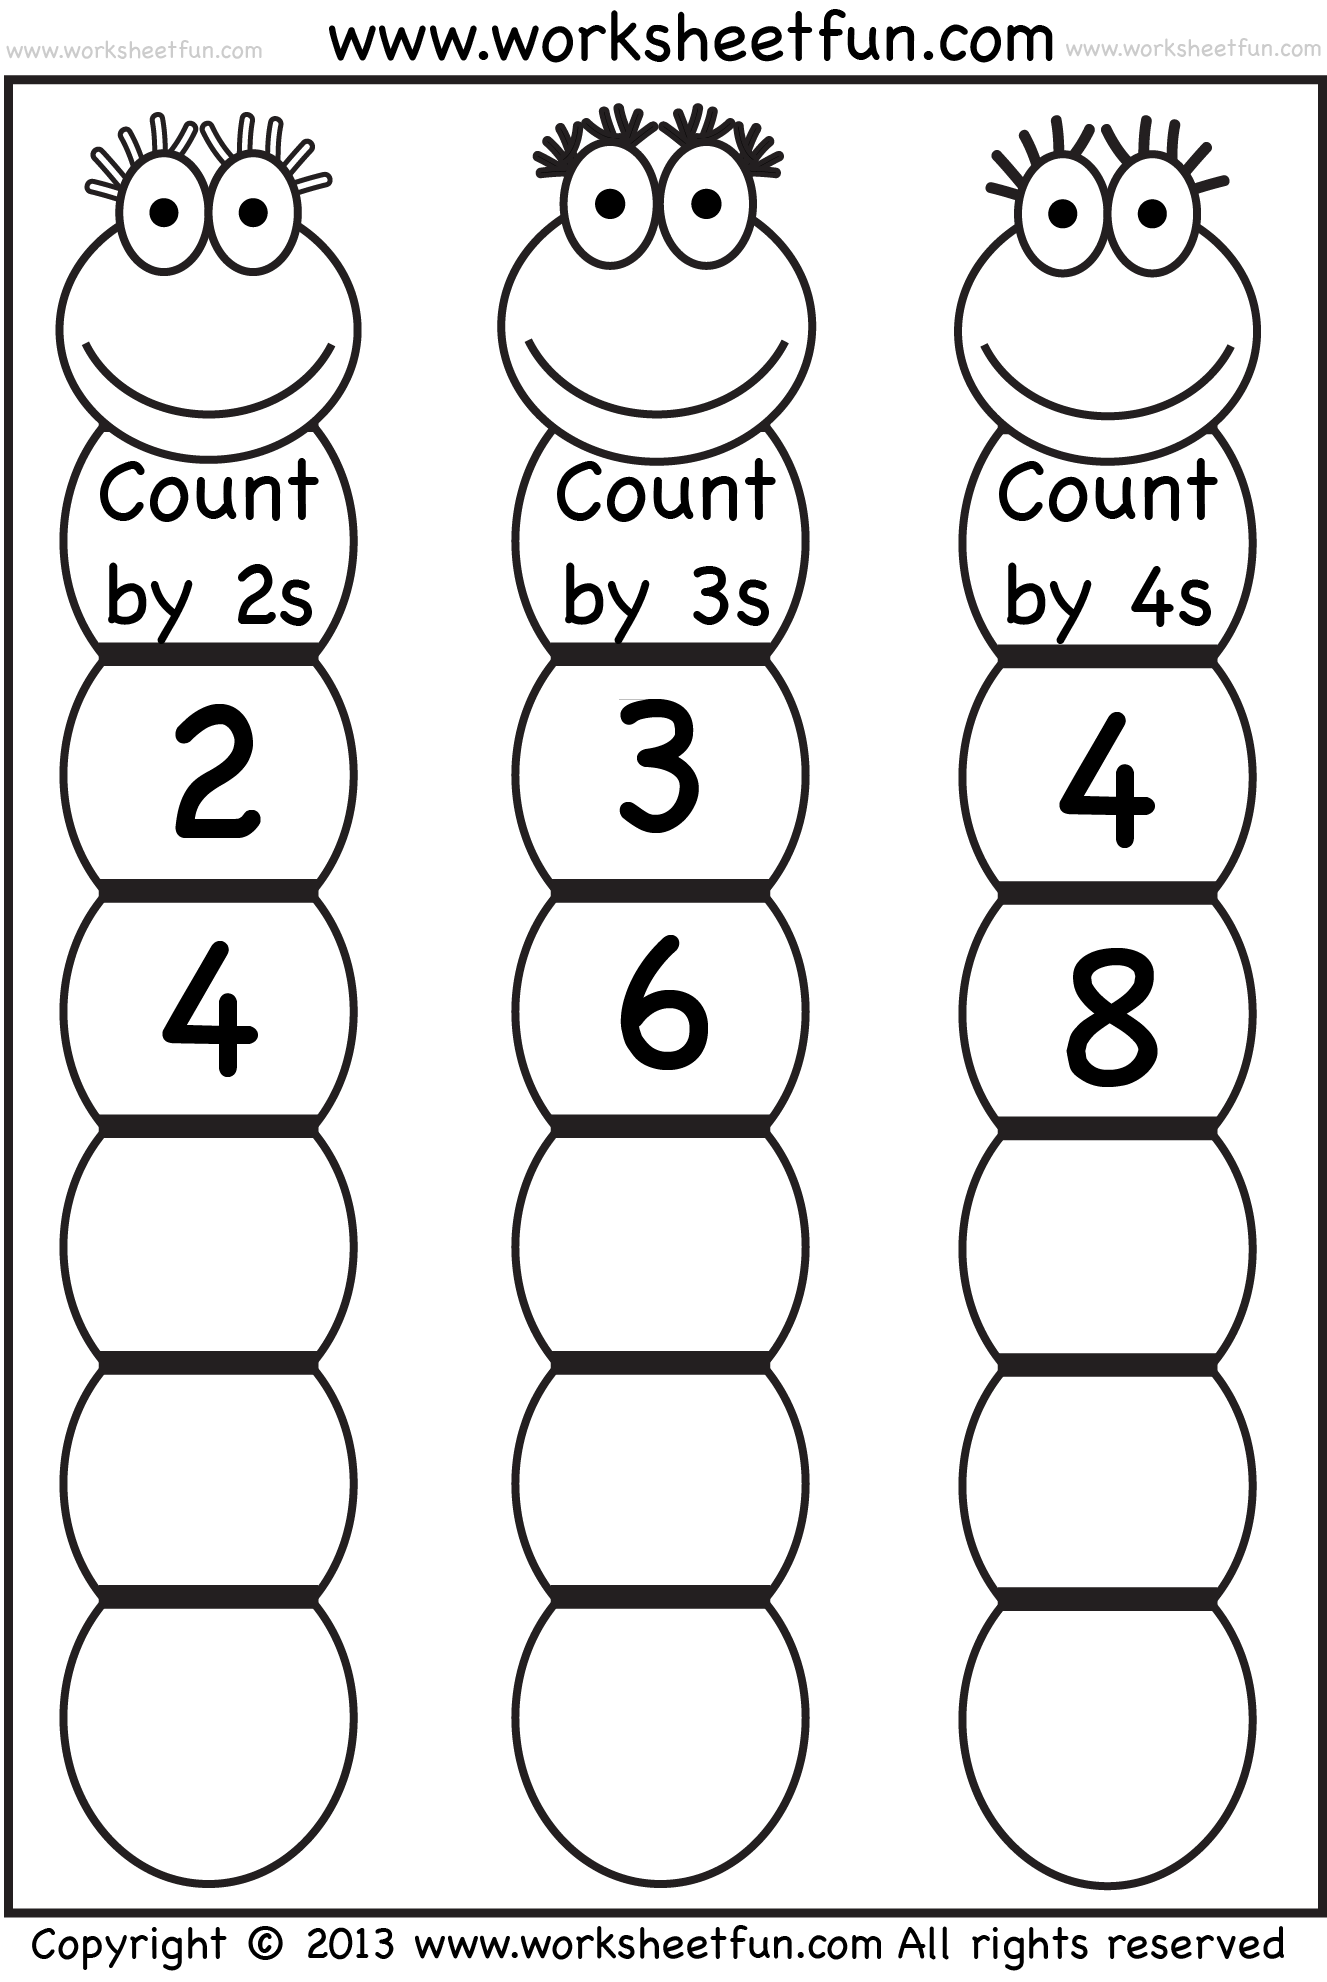 6-best-images-of-printable-count-by-2-worksheets-skip-counting-by-2s-worksheet-counting-by-5s